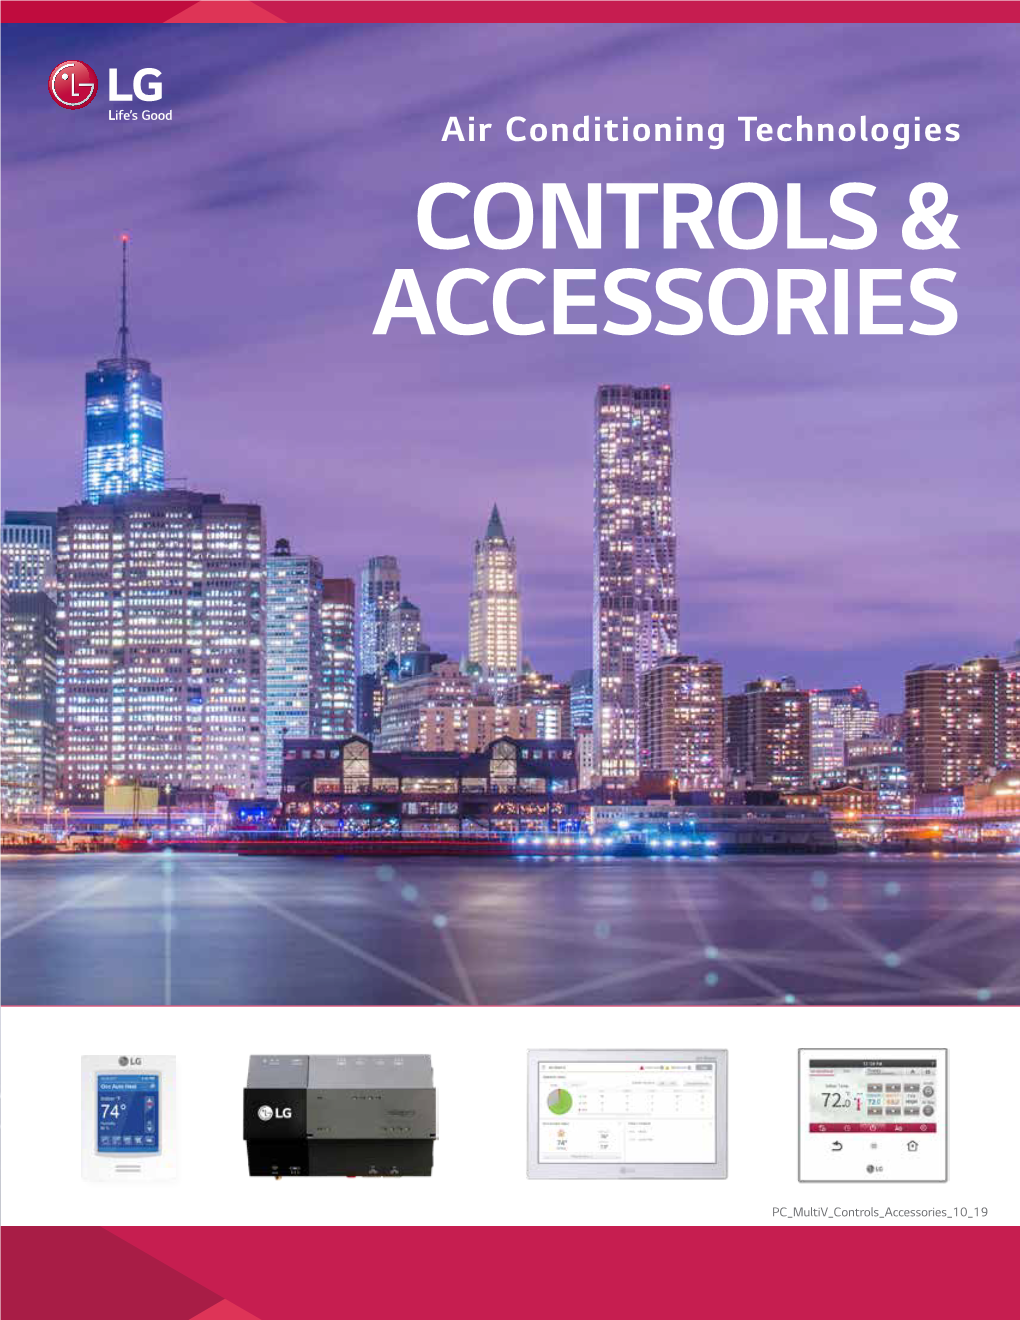 Air Conditioning Technologies CONTROLS & ACCESSORIES